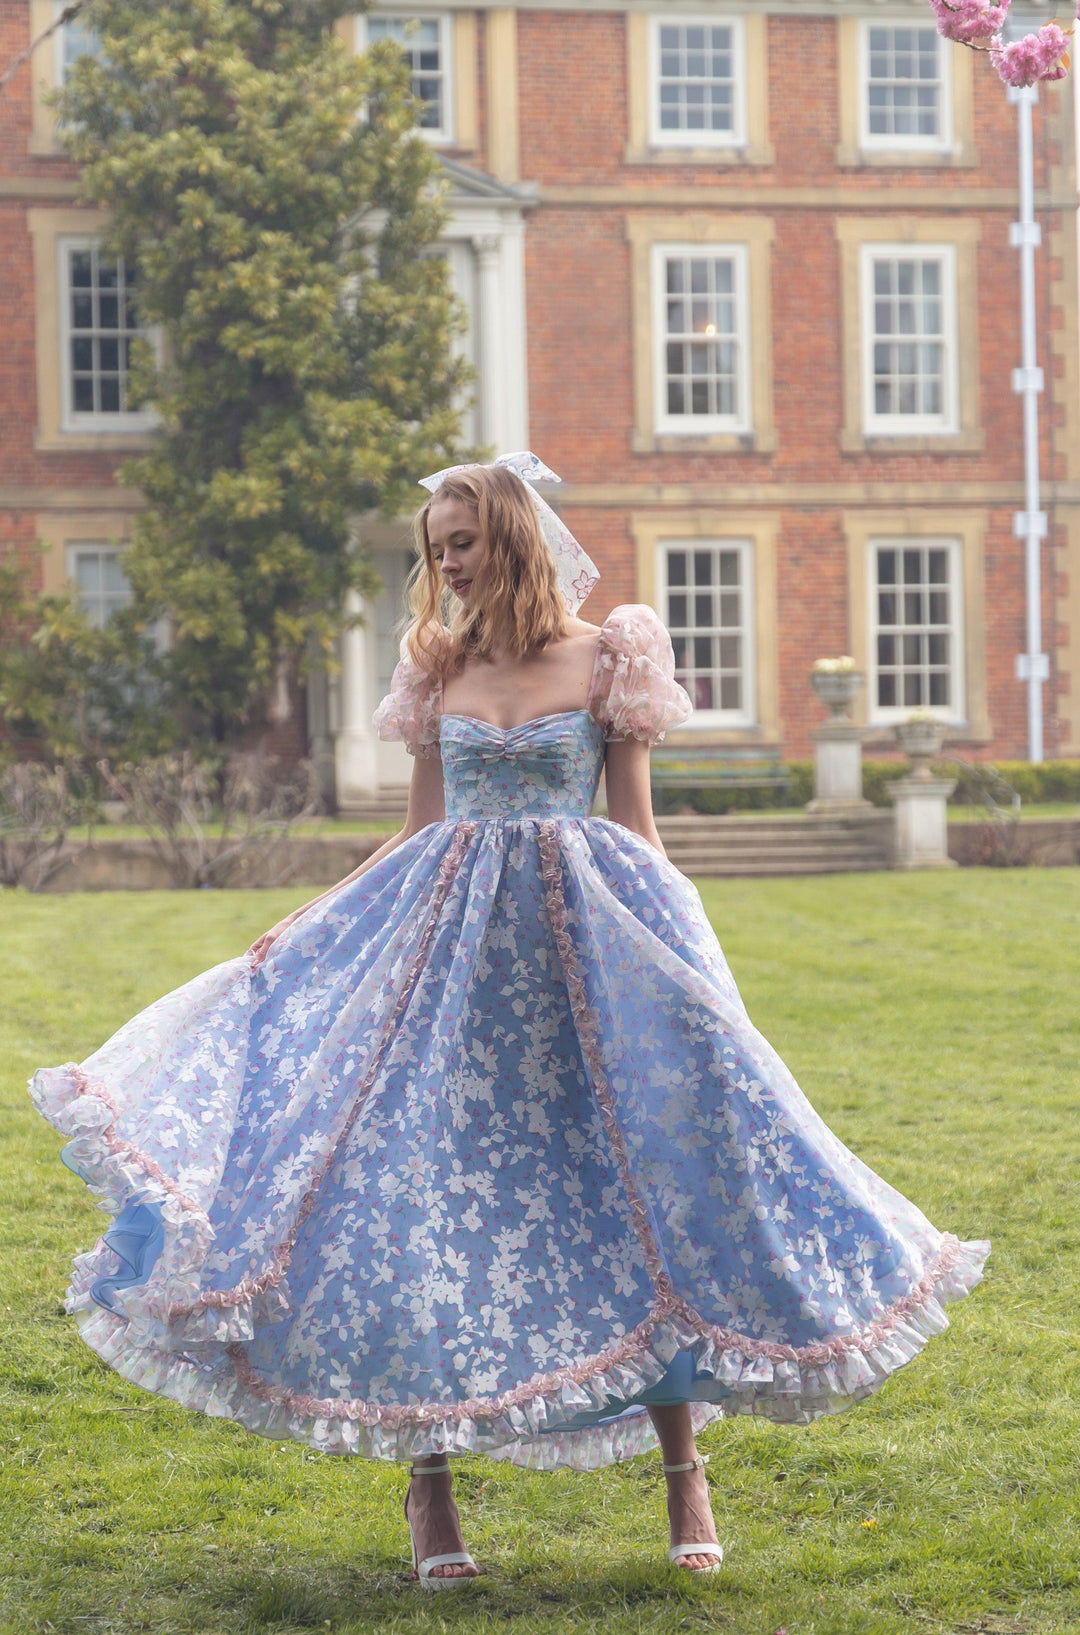 Fairy Tong dress Rose Princess Gown - Periwinkle Blue